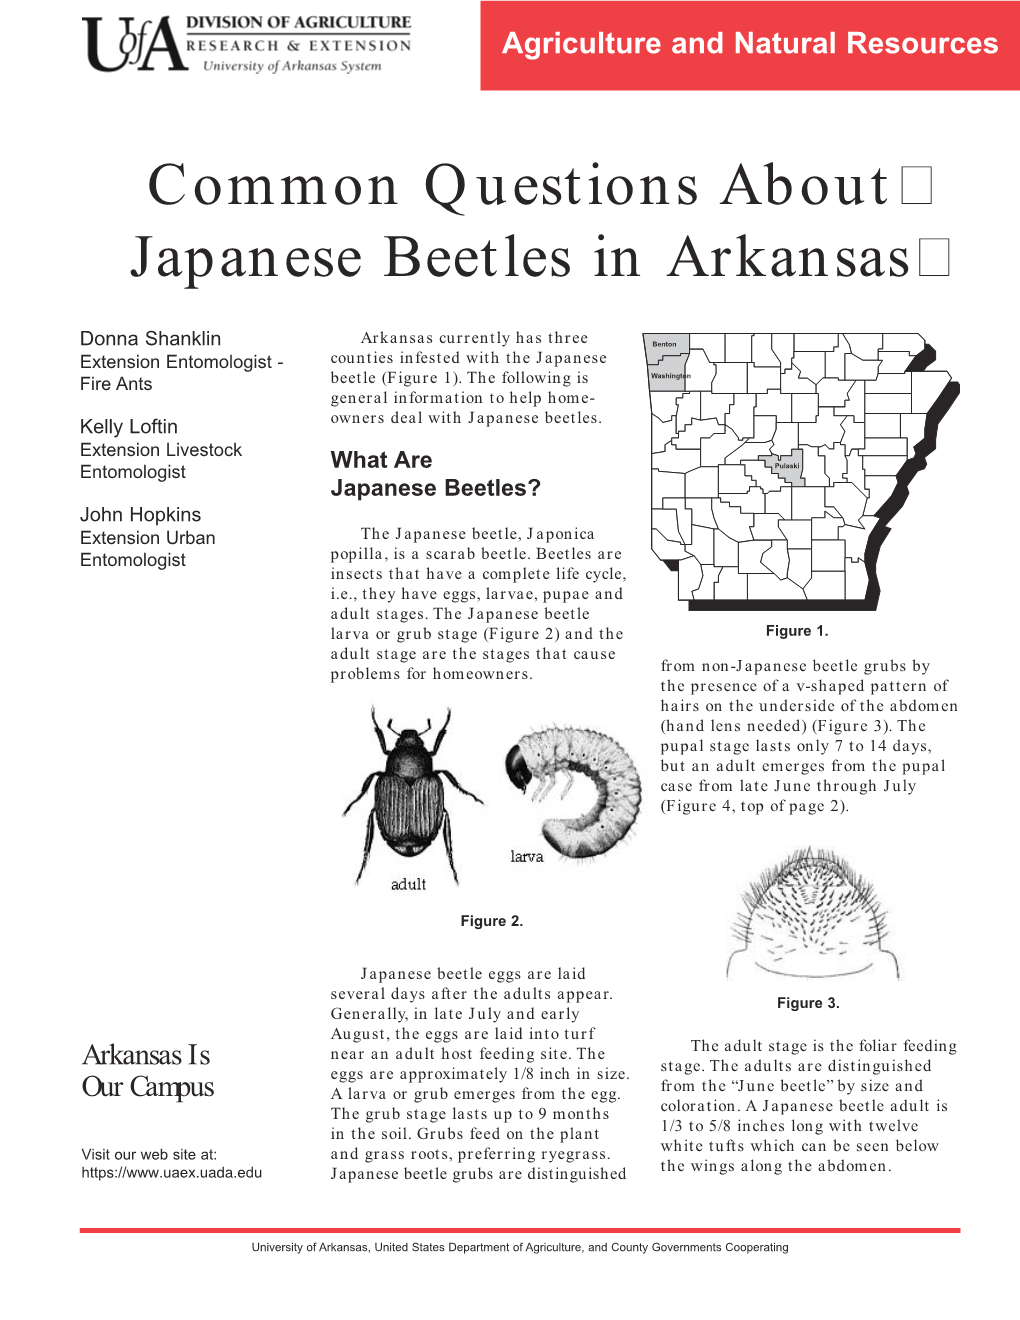 Common Questions About Japanese Beetles in Arkansas (FSA-7062)